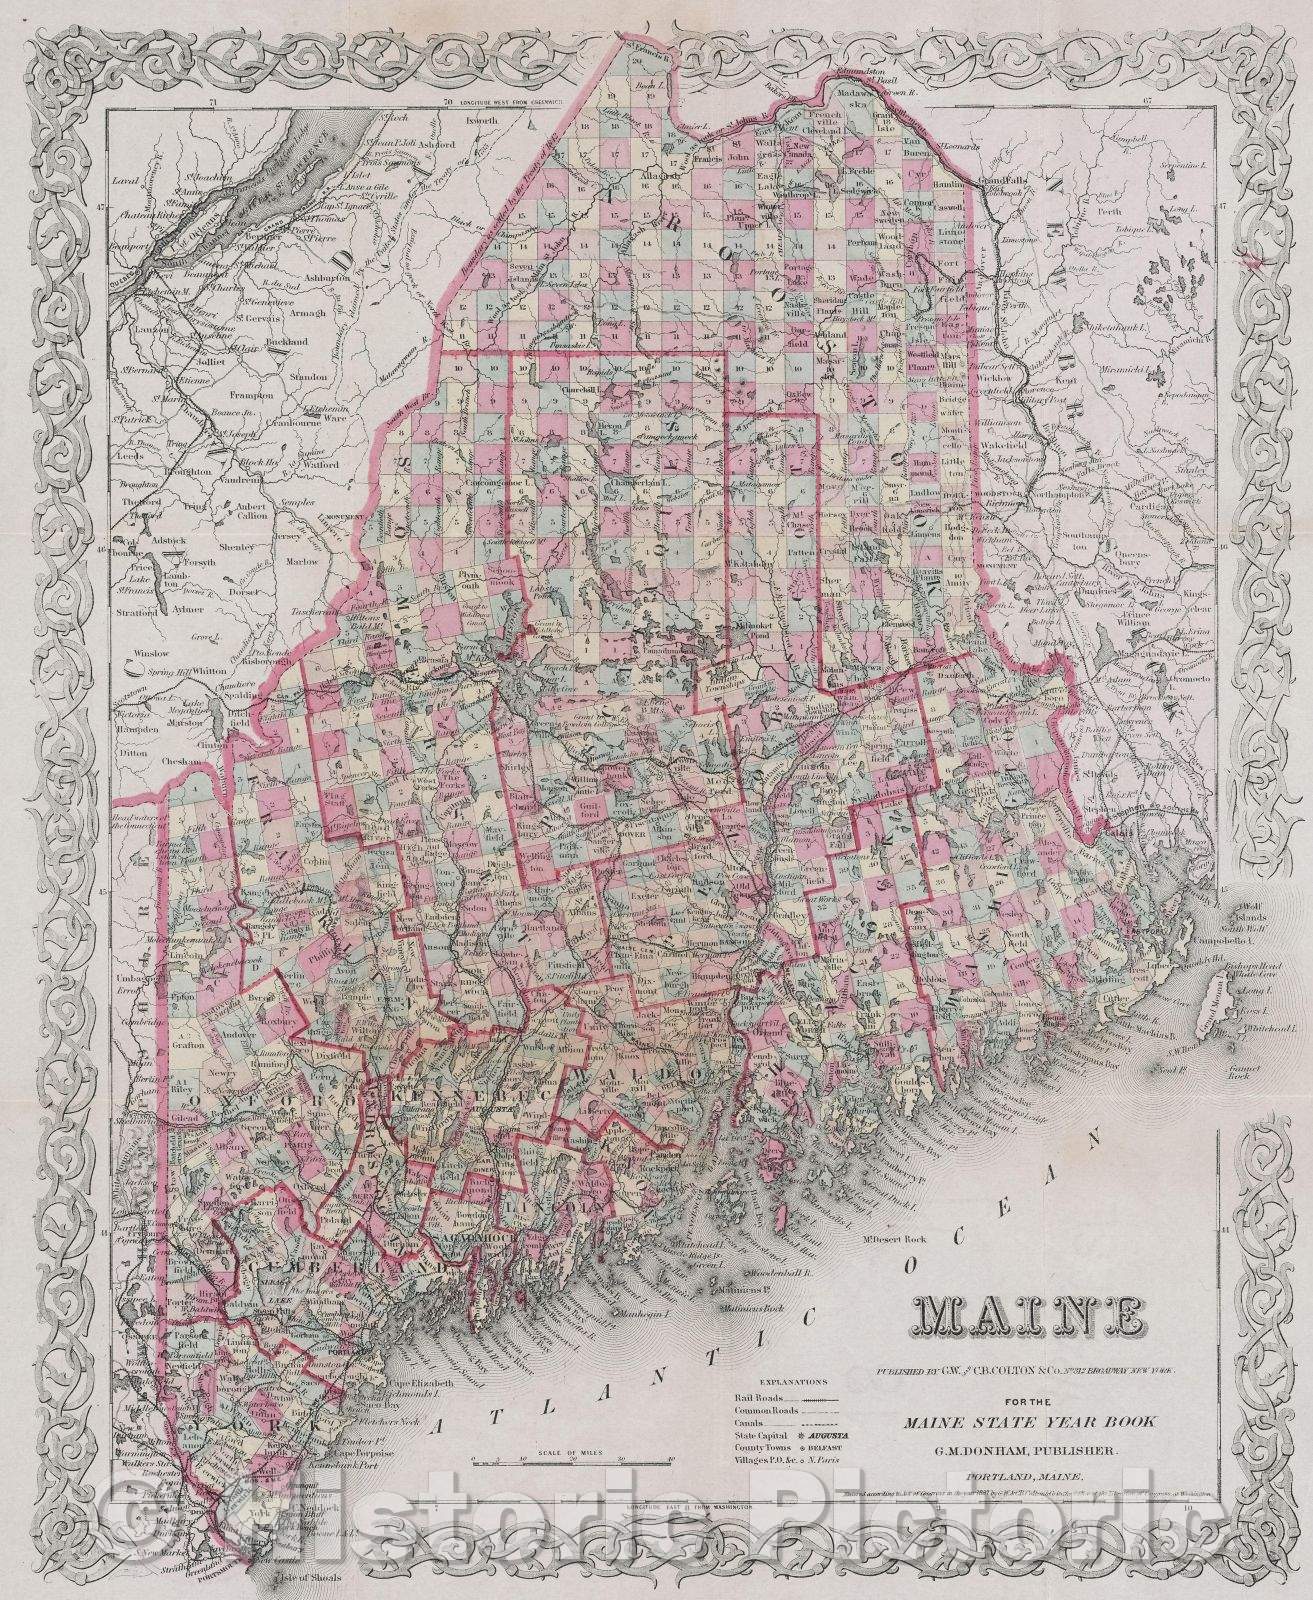 Historic Map : Maine published by G.W. and C.B. Colton and Co. No. 312 Broadway New York for the Maine State Year Book, 1887 , Vintage Wall Art